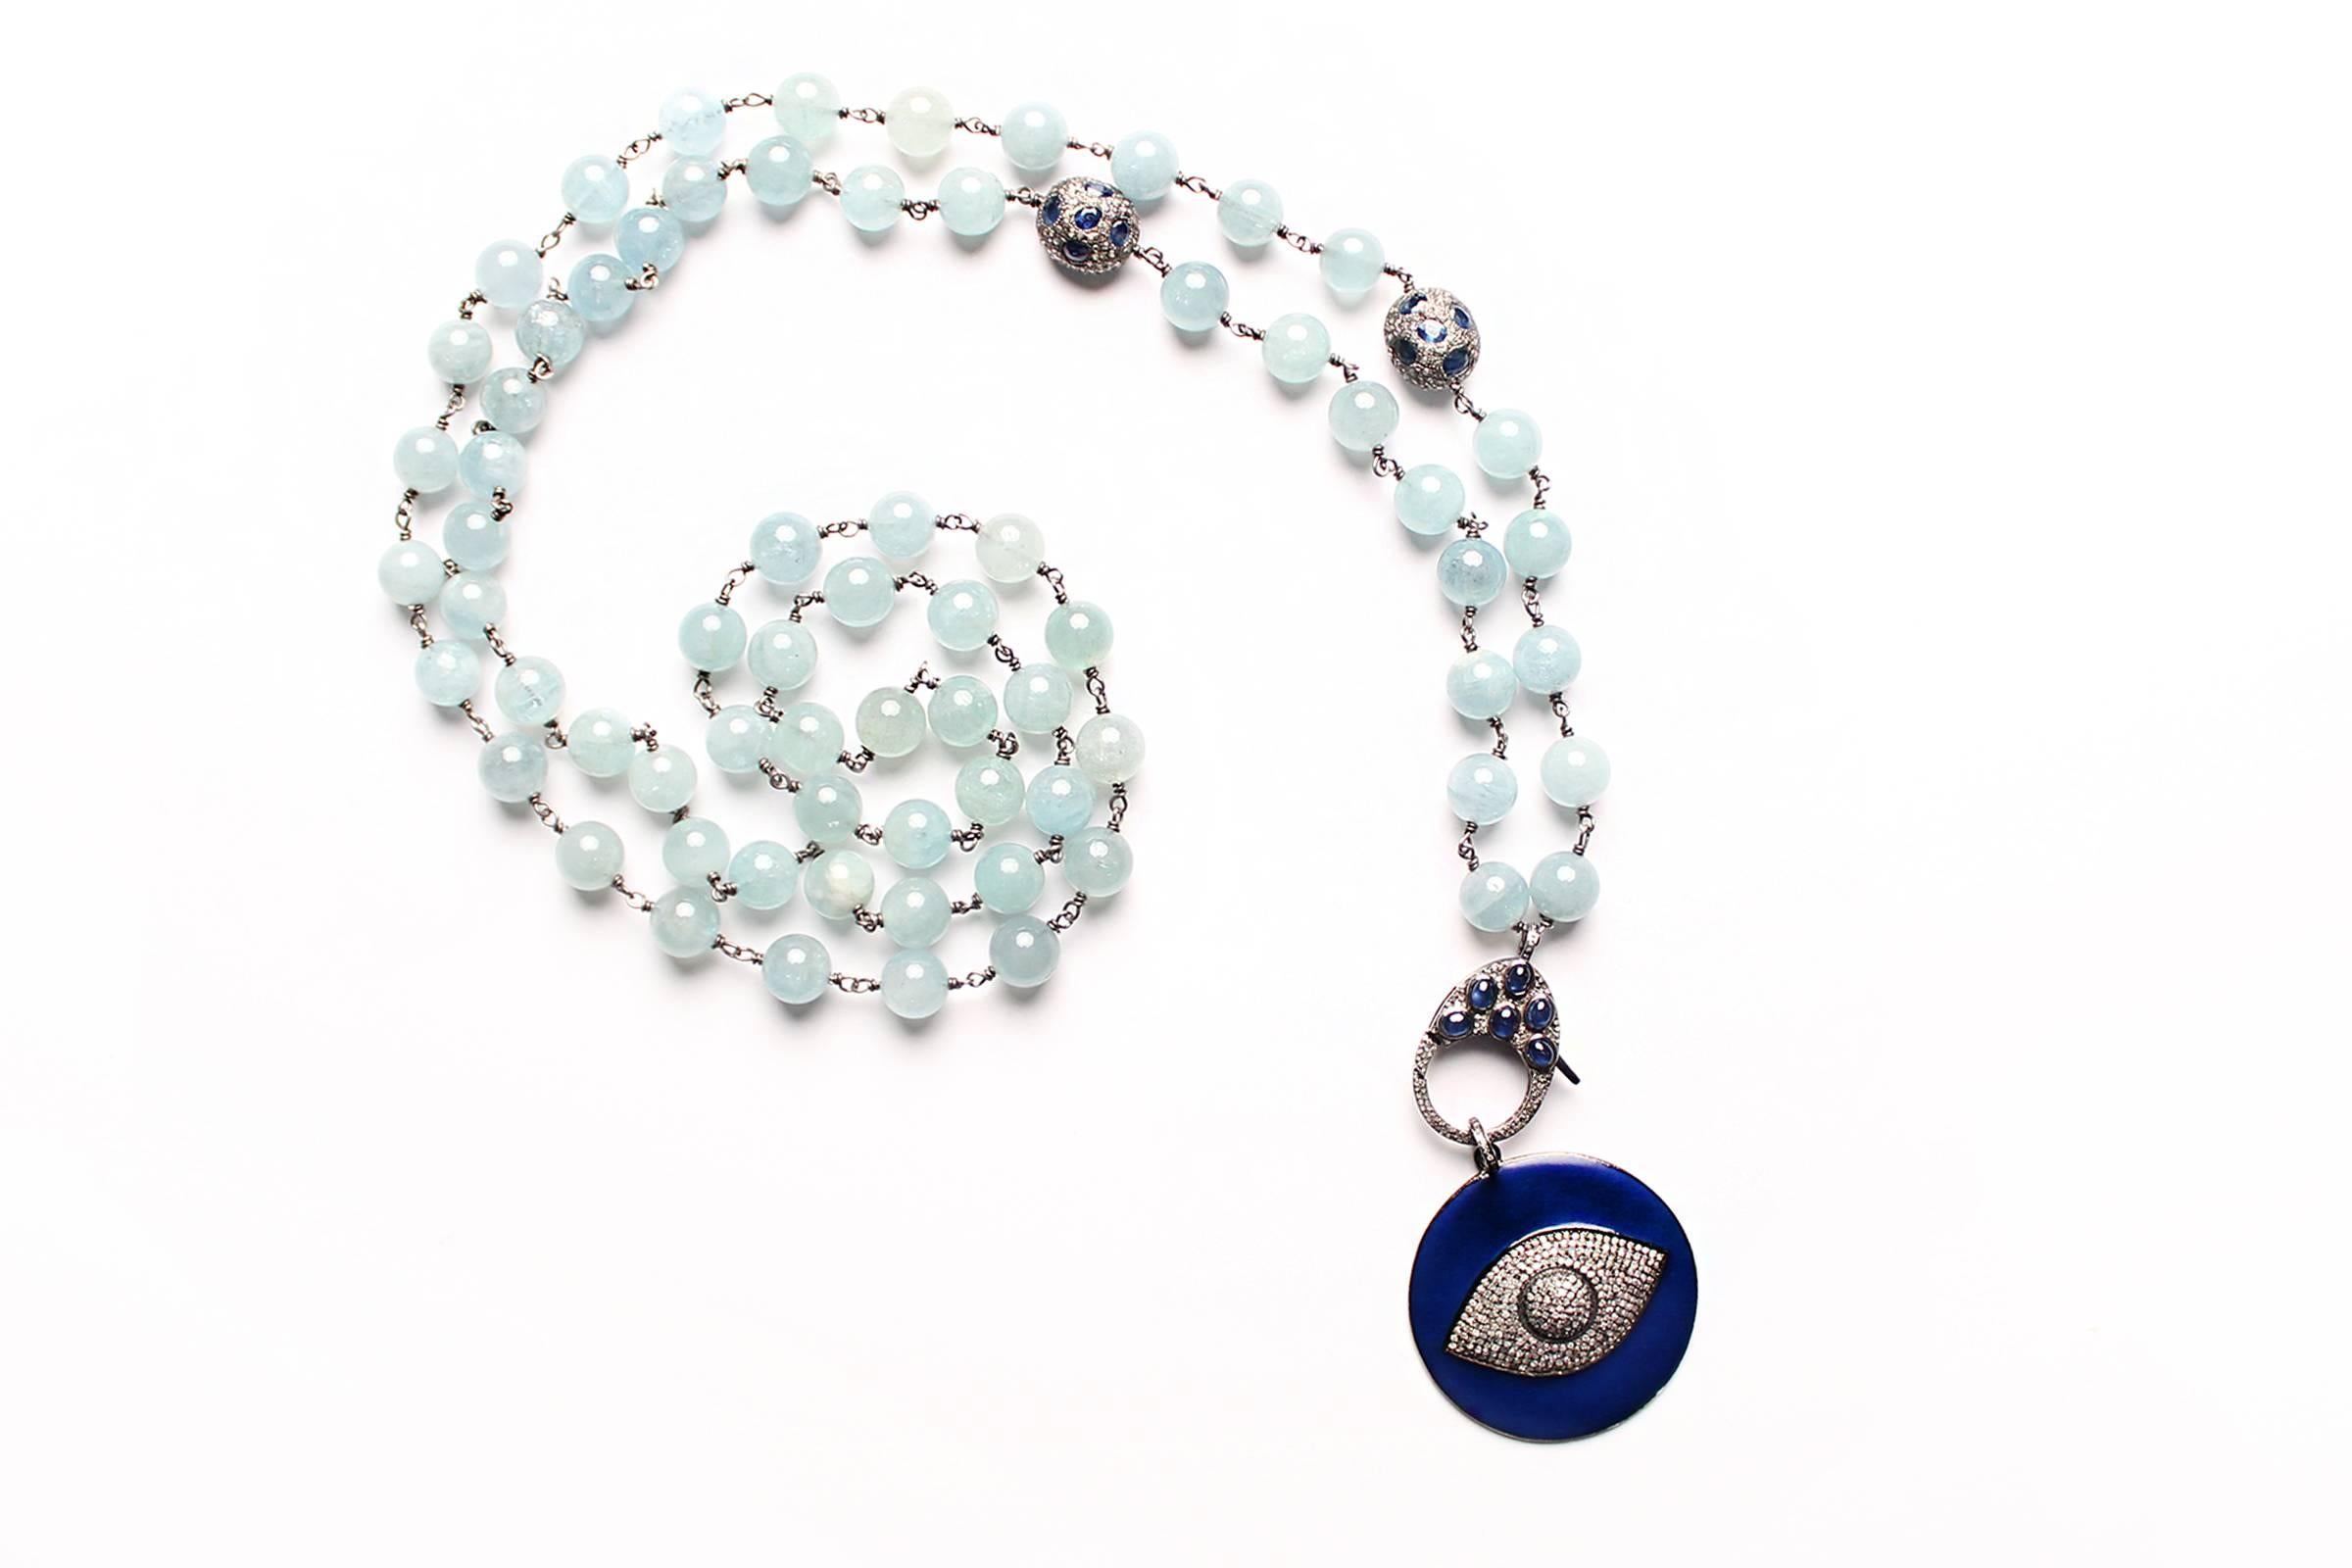 Beaded necklace made of aquamarine beads, silver, with diamond sapphire tumblers on silver. Royal blue enamel eye pendant with diamonds. 